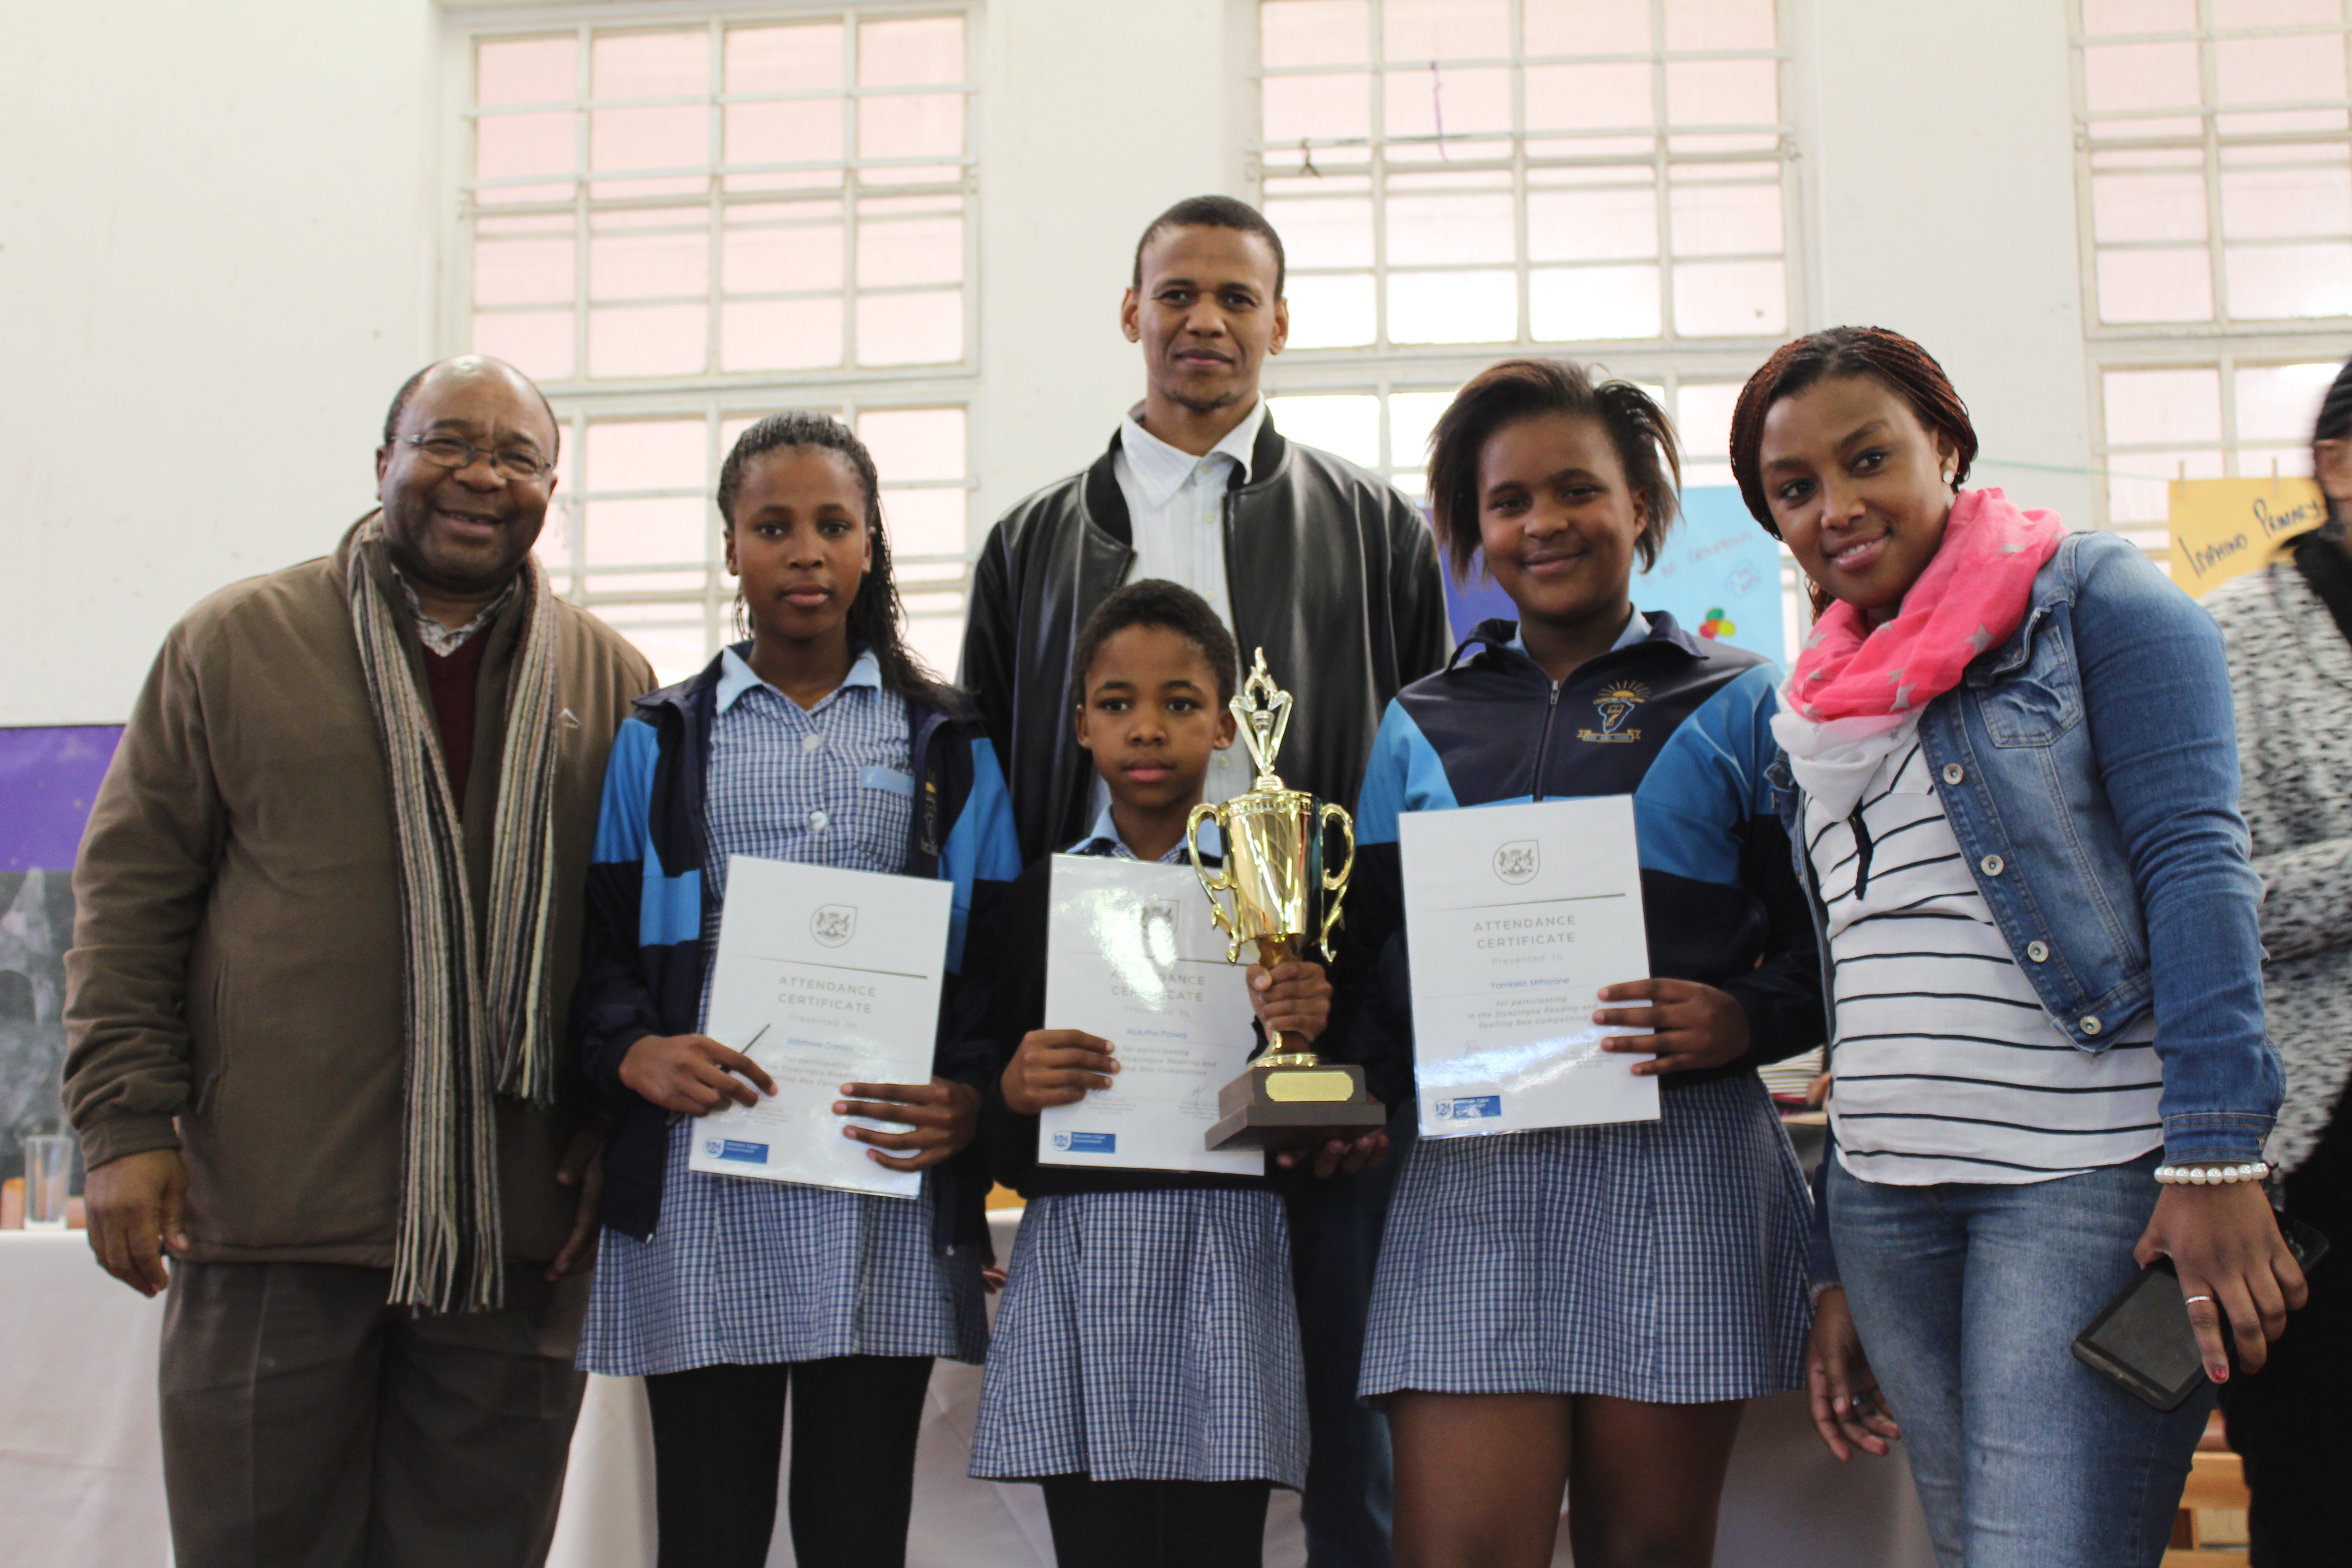 Grade 7 participants from Isiphiwo Primary School came first in their category